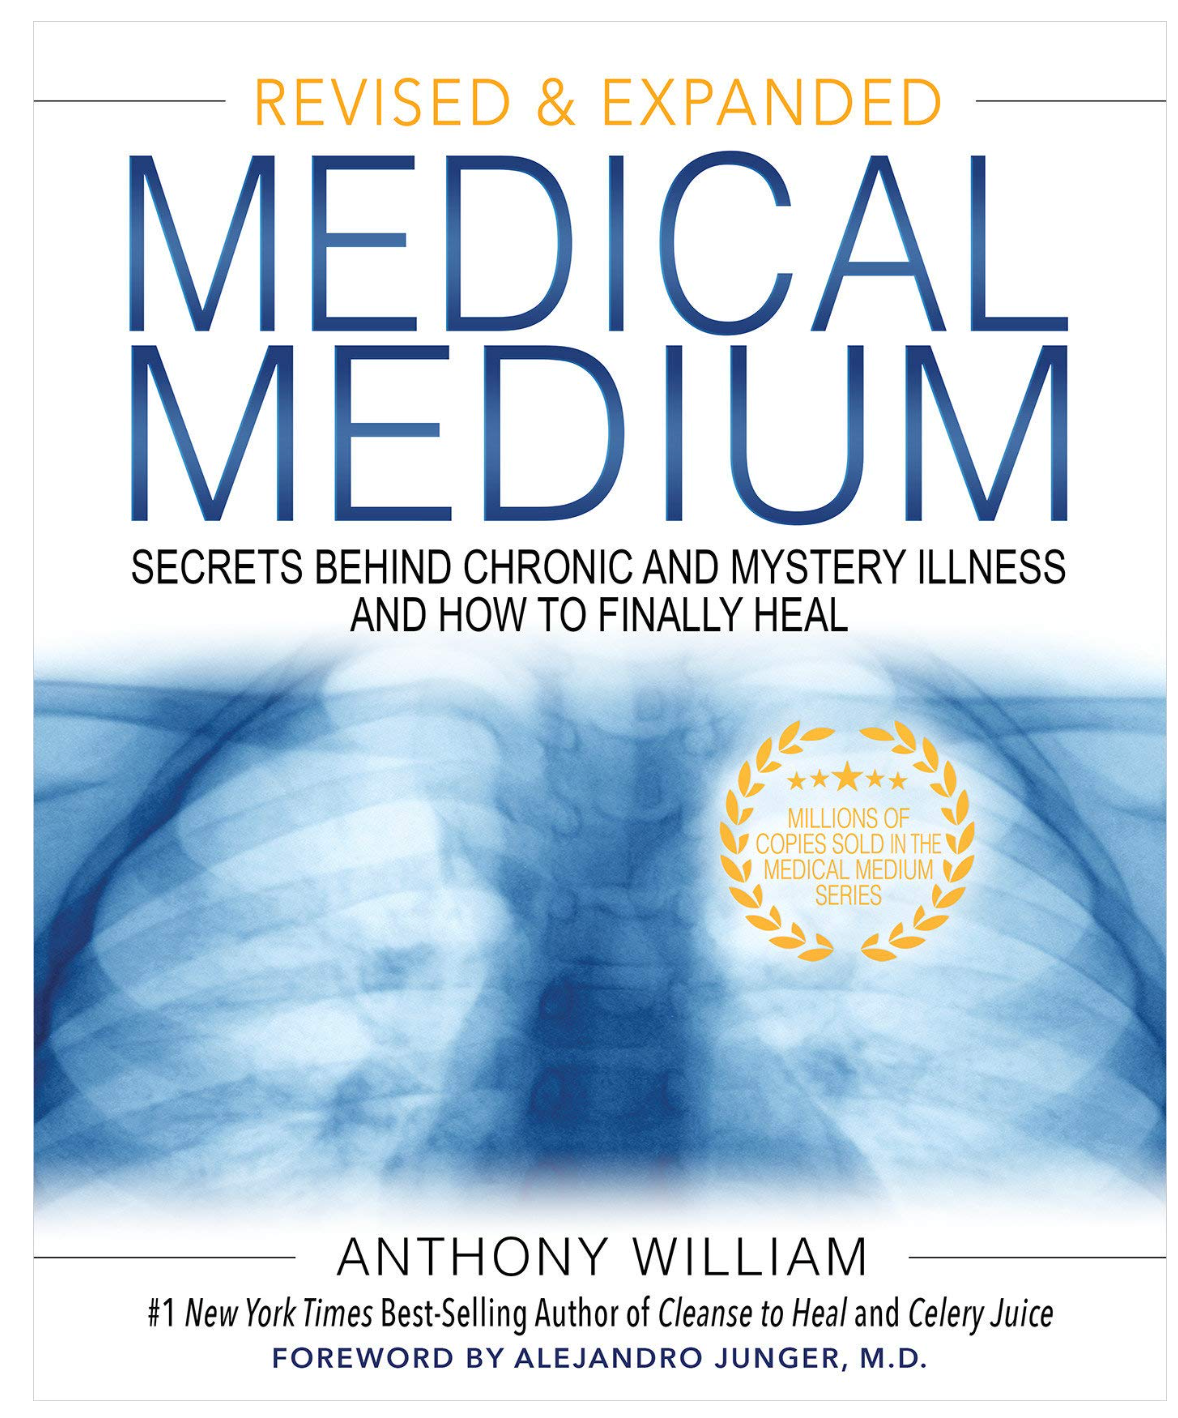 Medical Medium: Secrets Behind Chronic and Mystery Illness and How to Finally Heal (Revised and Expanded Edition) Book